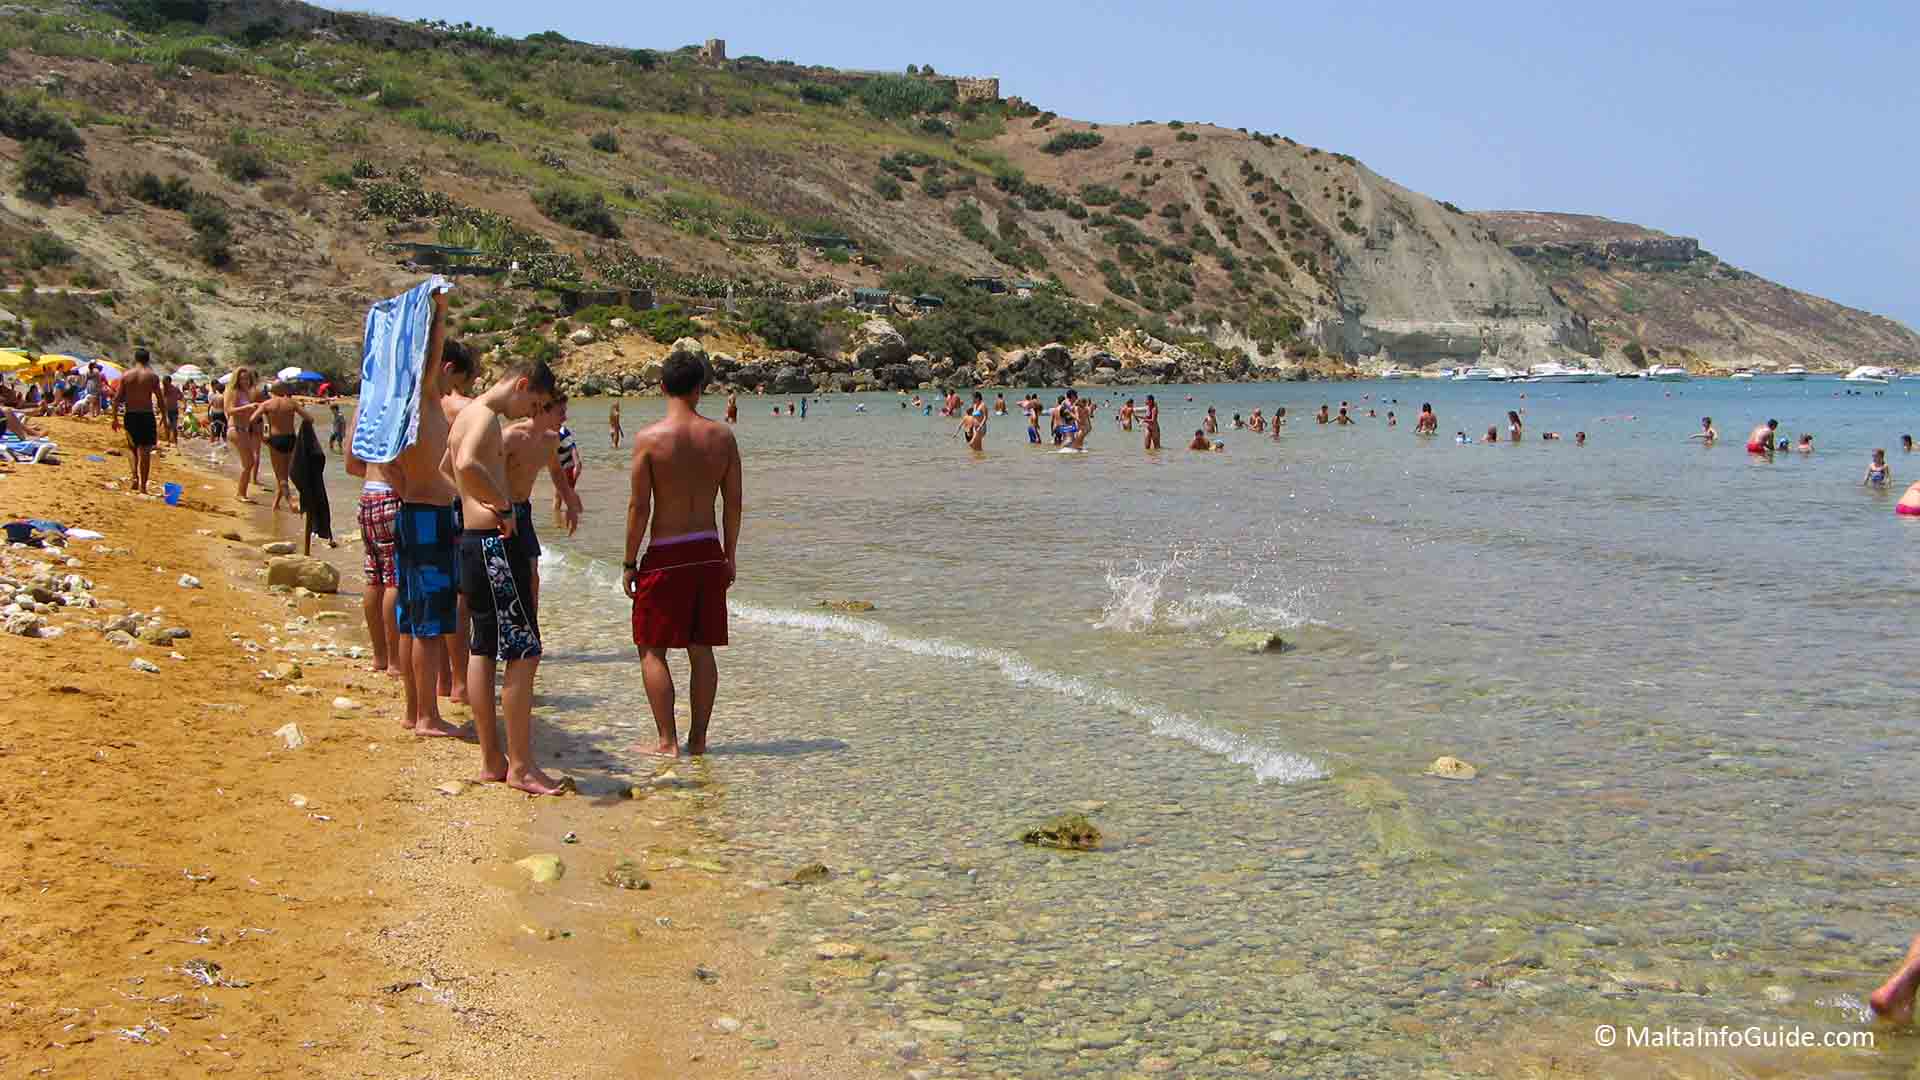 Youngsters enjoying the day at Ramla Bay Gozo.